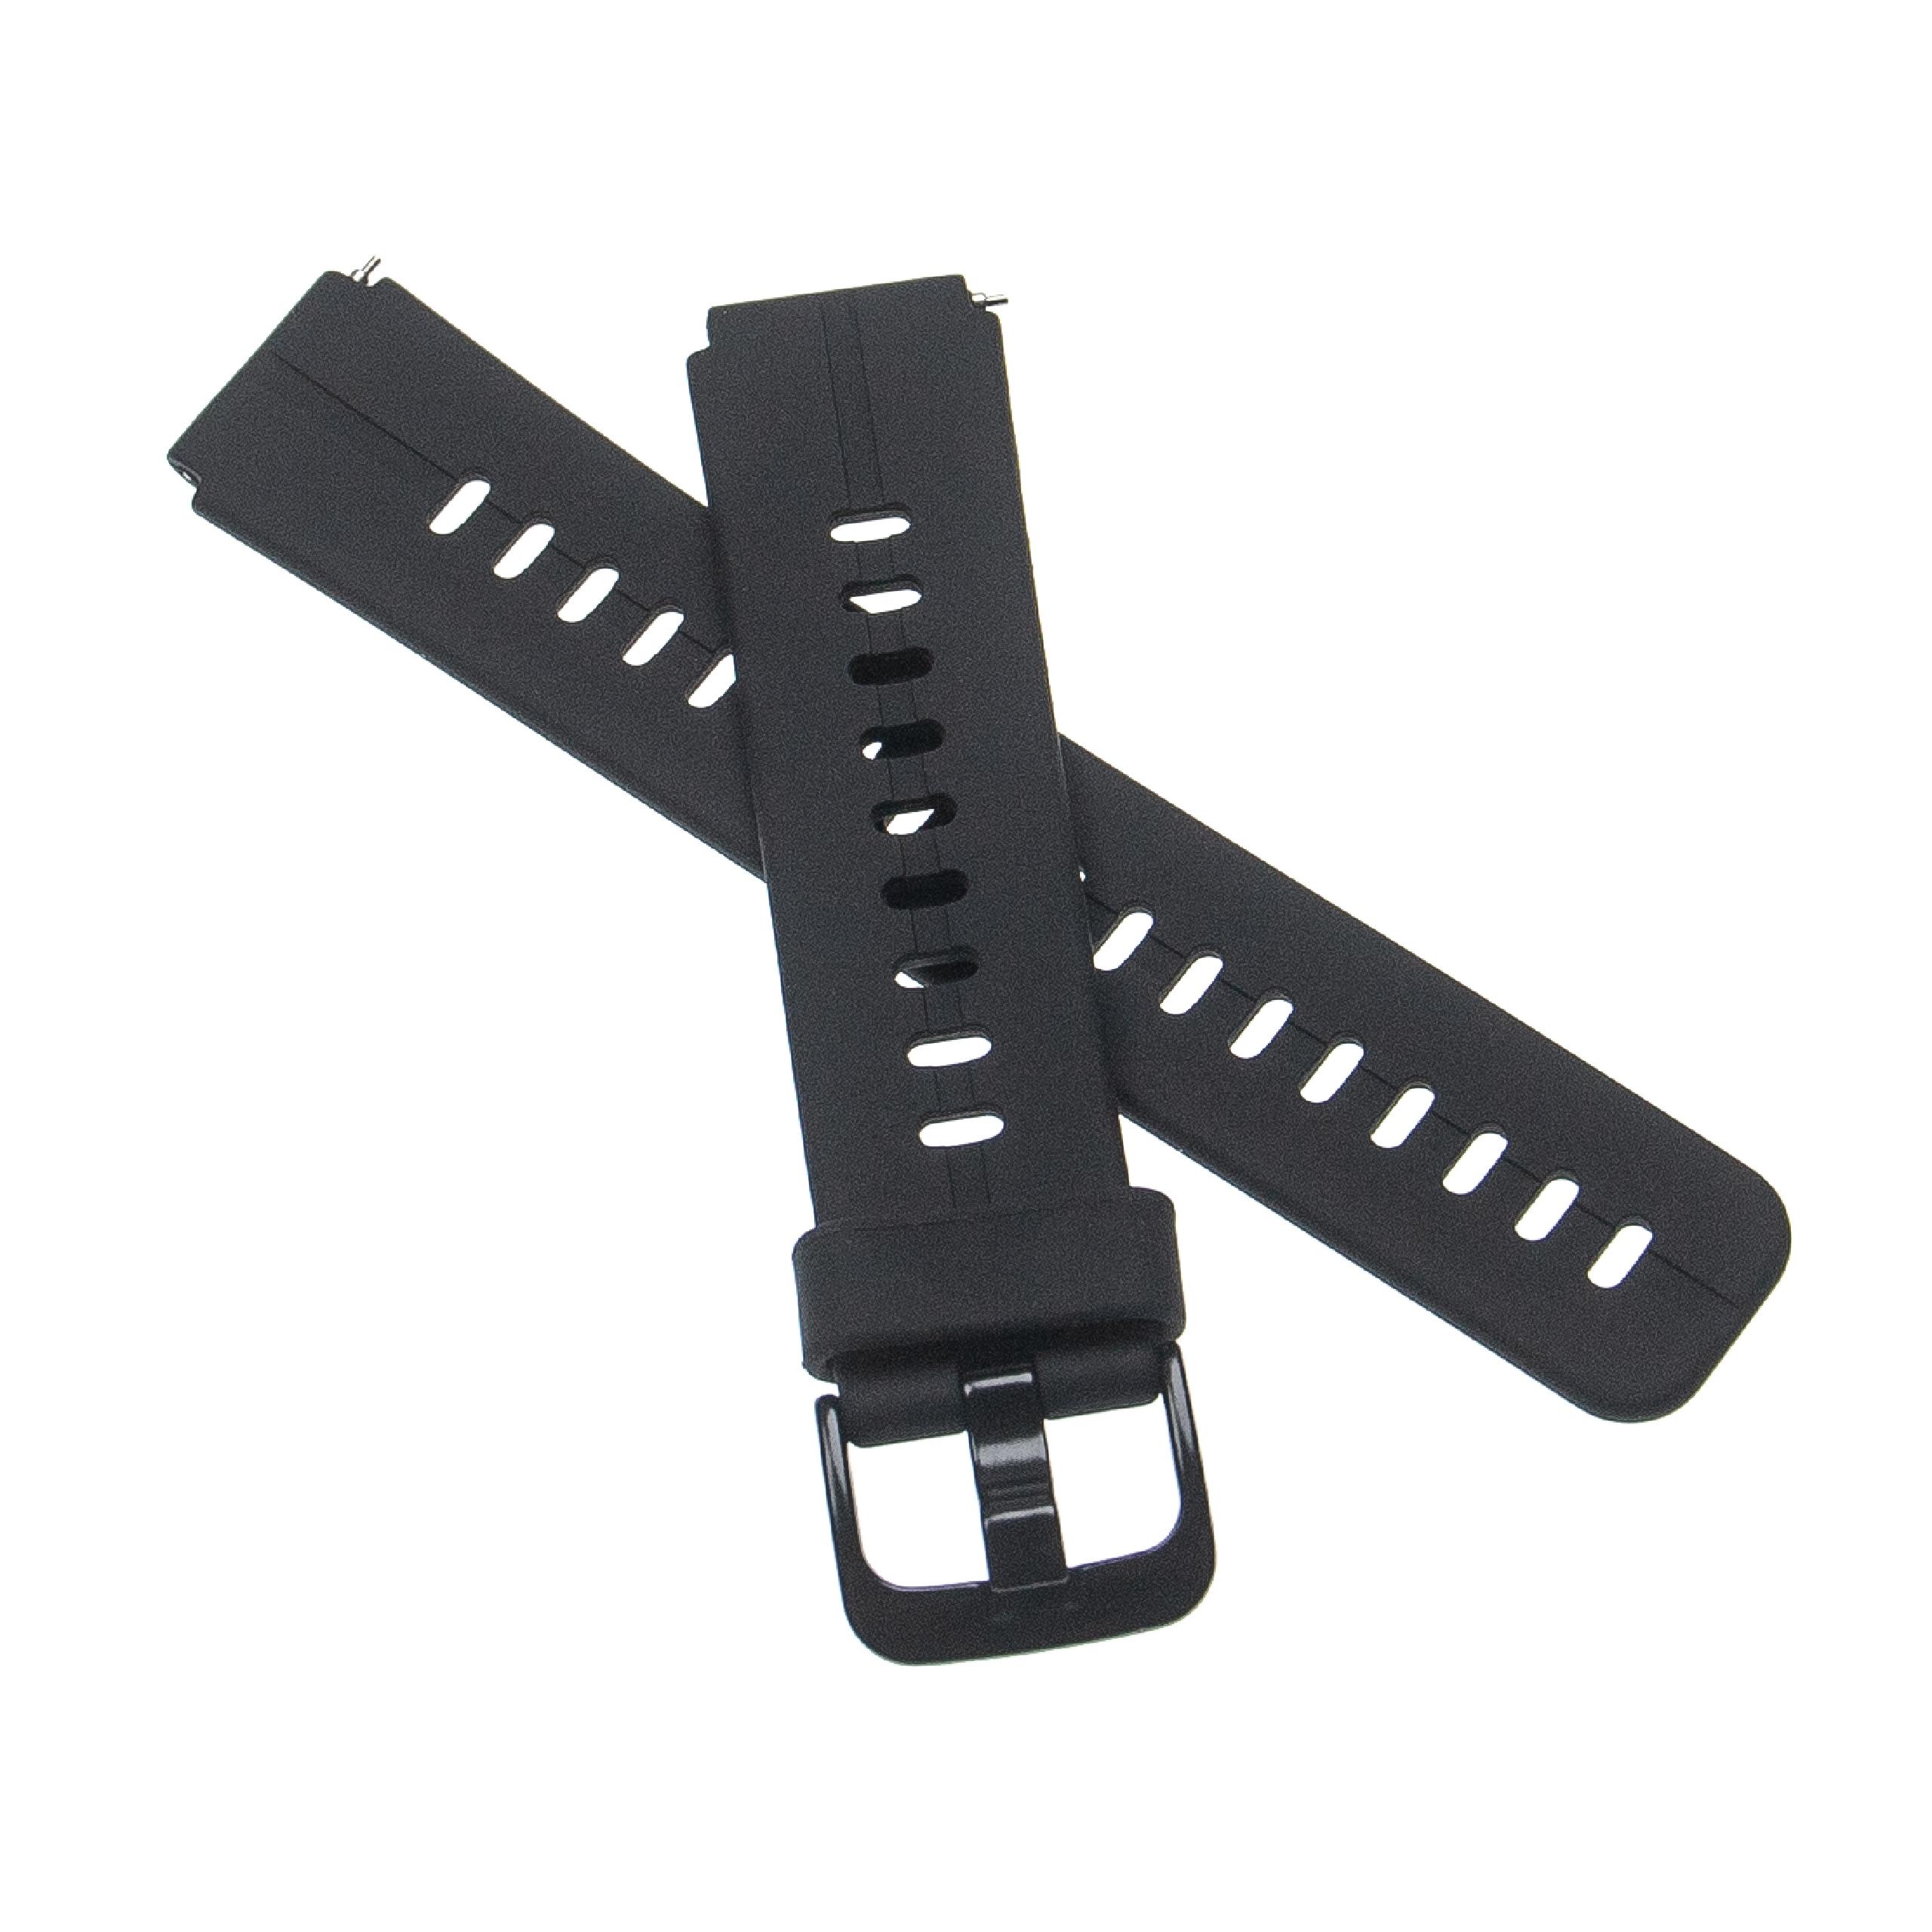 wristband for Huawei Smartwatch - 11.2 + 8.8 cm long, 16mm wide, silicone, black